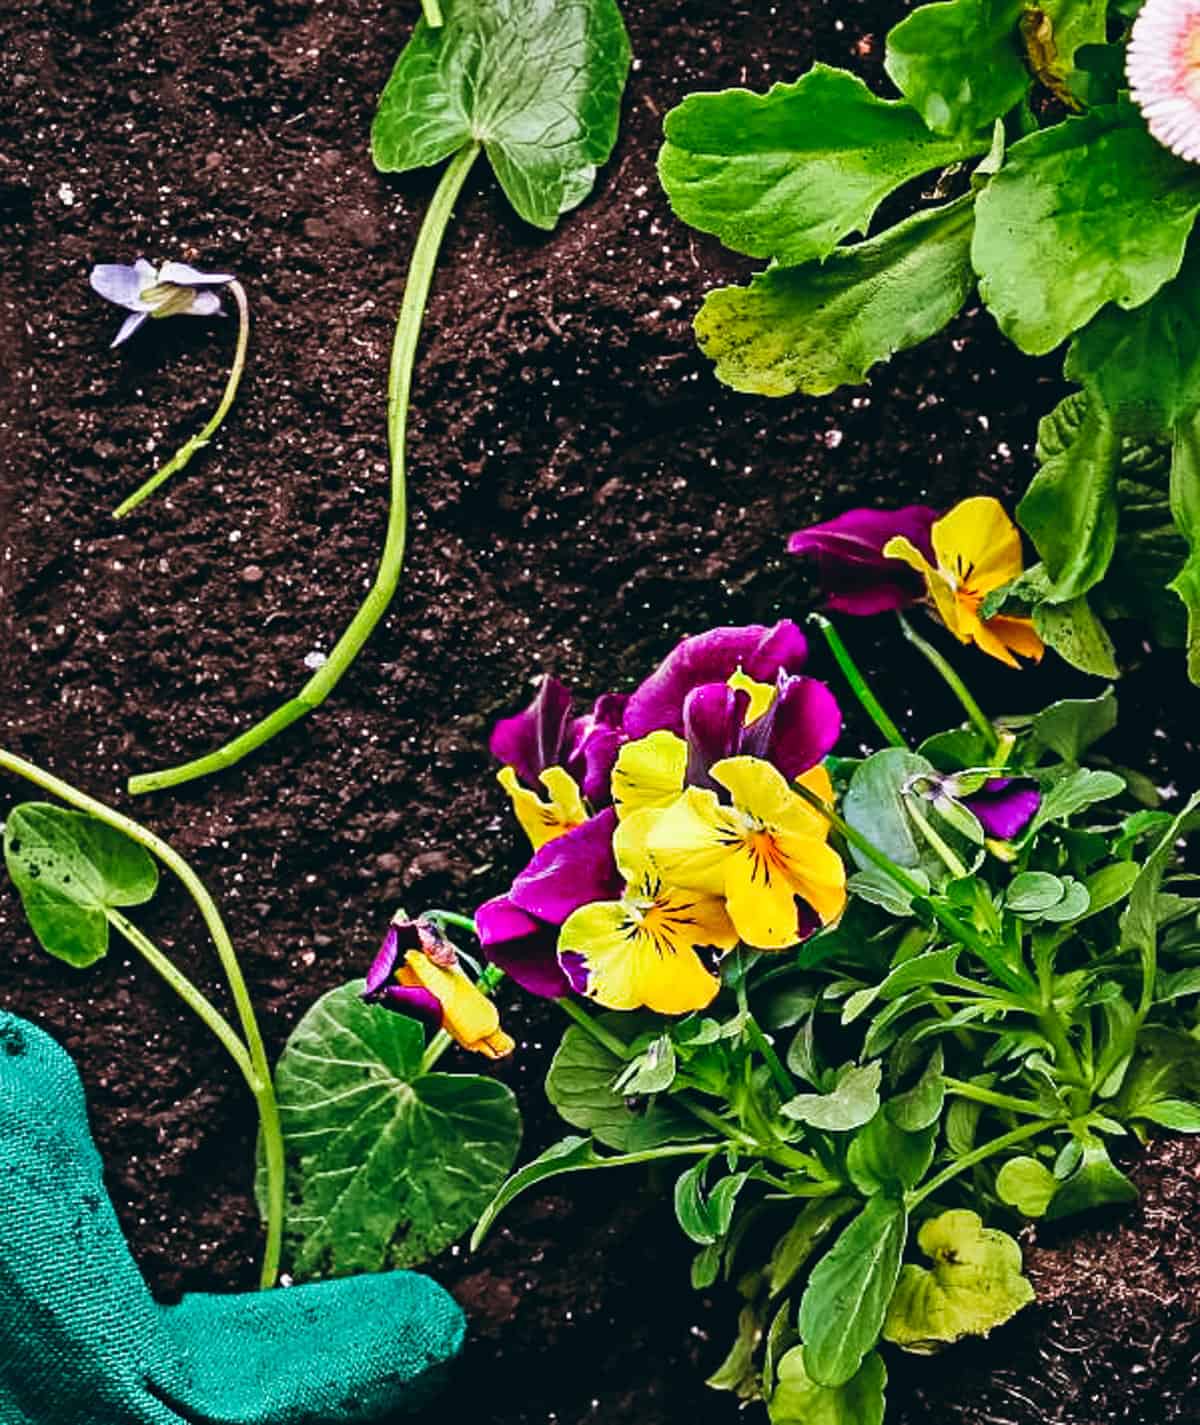 rich soil with a freshly picked bundle vibrant purple and yellow pansy flowers with green stems next to a pair of dirty blue garden gloves